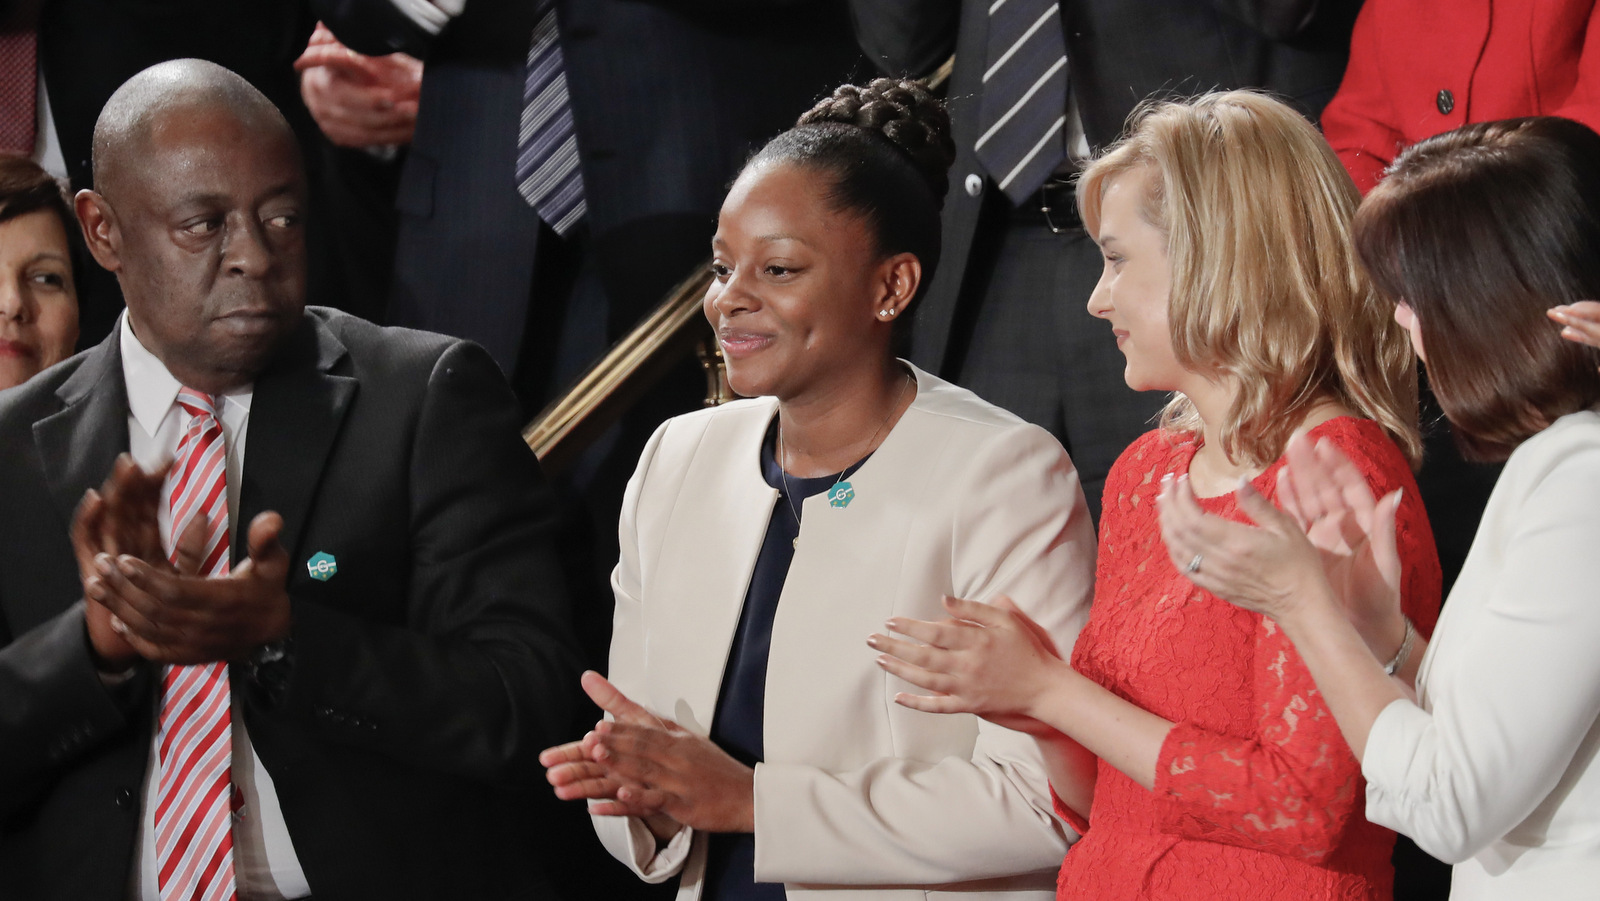 Denisha Merriweather, center, stands up after being acknowledge by President Donald Trump during his address Congress in Washington, Feb. 28, 2017. (AP/Pablo Martinez Monsivais)